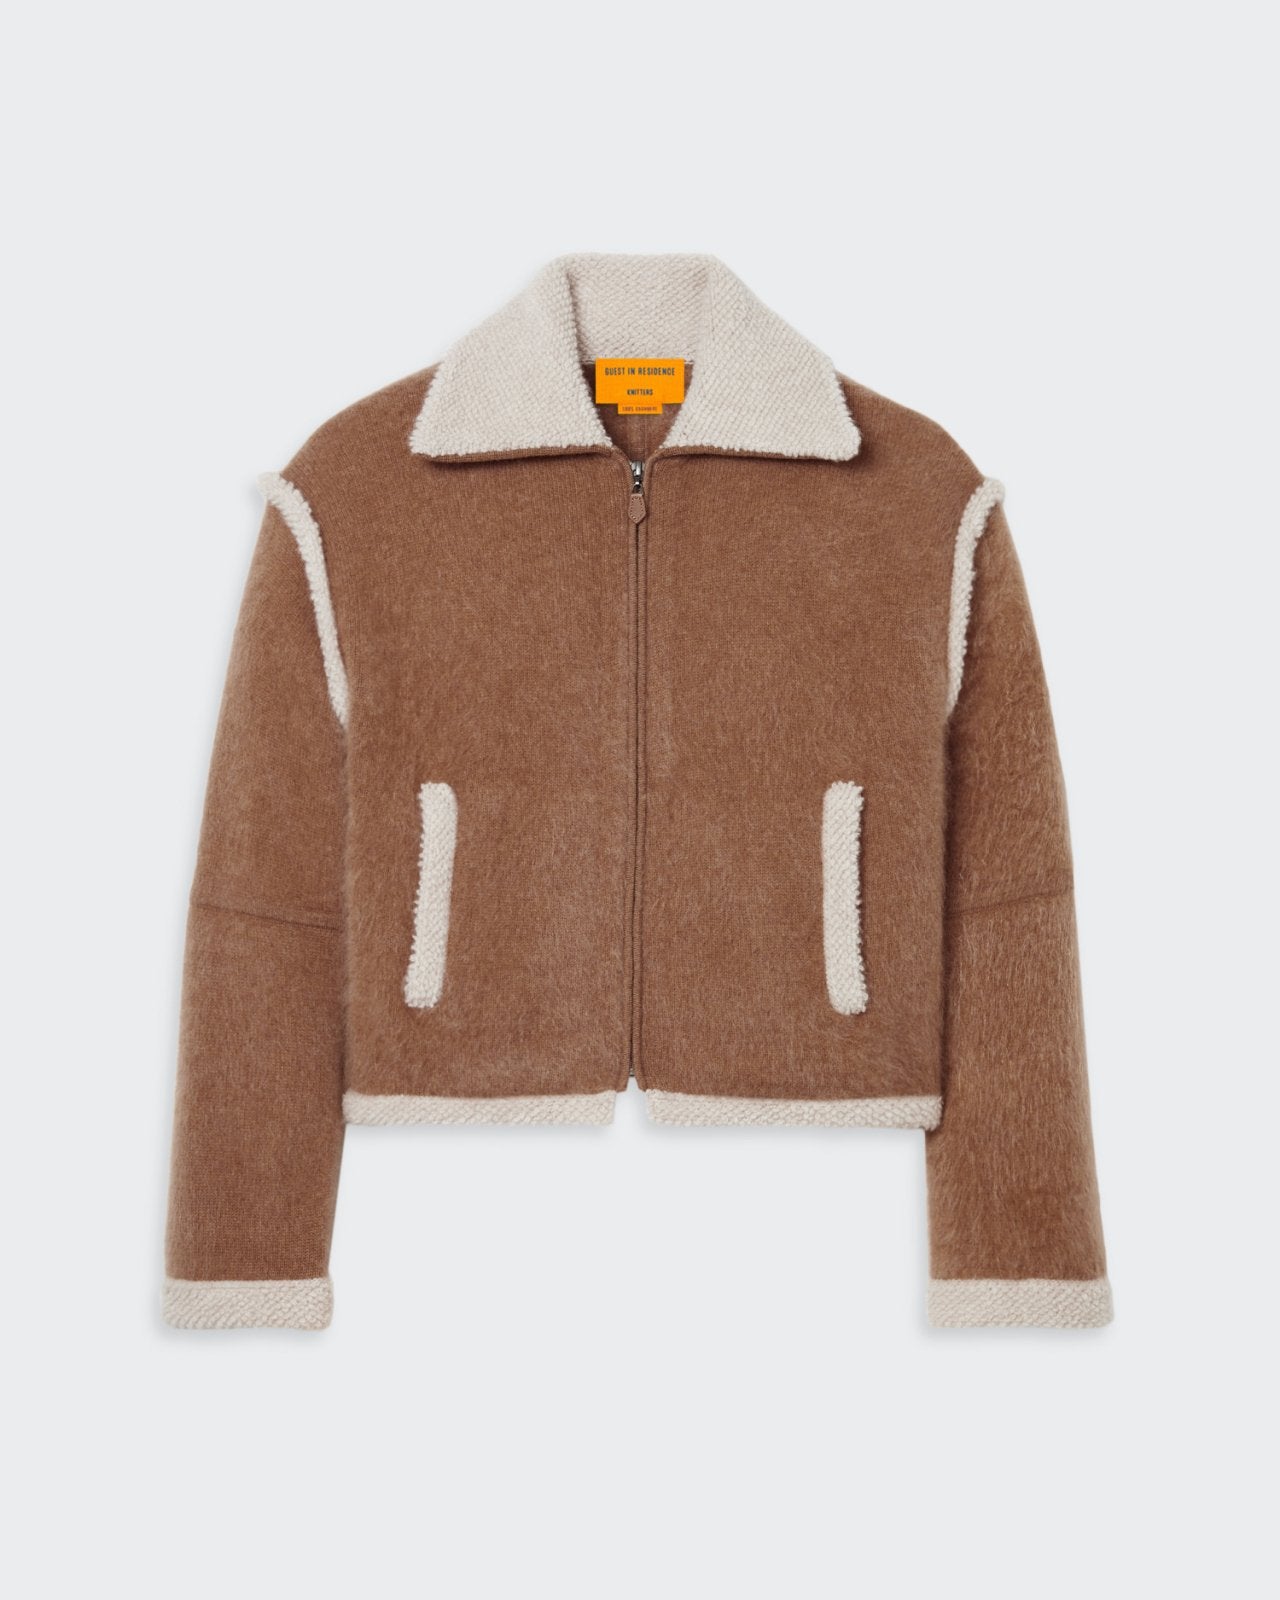 Grizzly Bomber - Almond/Oatmeal